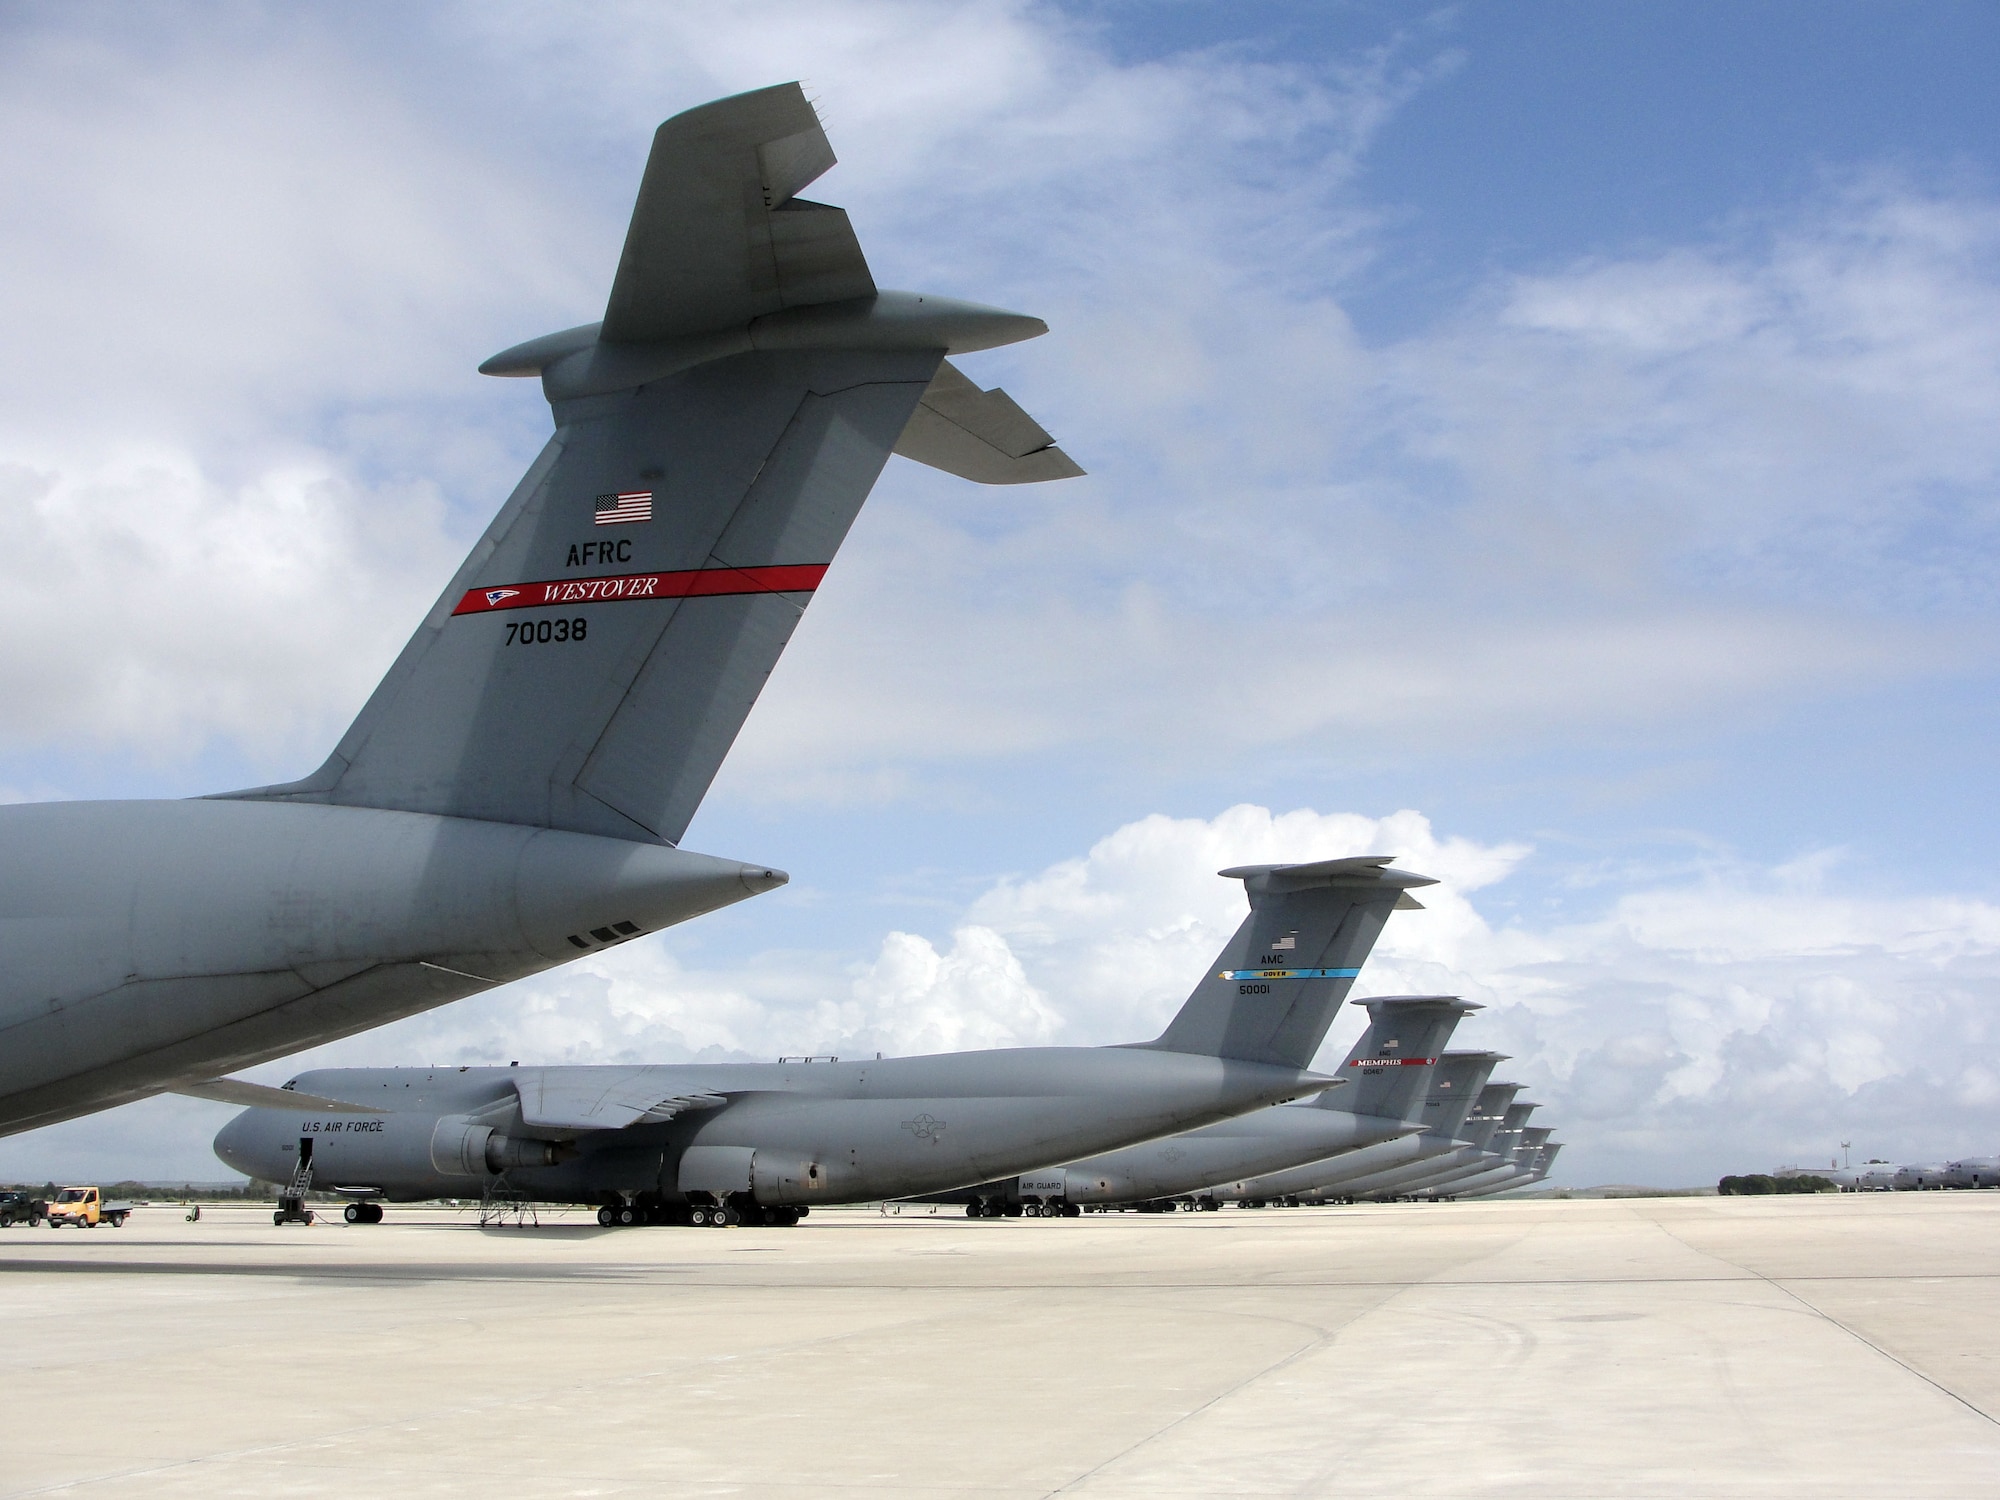 Air Mobility Command C-5’s sit on the flight line at Naval Station Rota, Spain, April 17. Rota and Moron Air Base, Spain, absorbed many U.S. military flights that were diverted from Northern European Routes due to the airspace closure caused by ash being spewed from the Iceland volcanic eruption.  Rota typically averages about eight to 13 flights a day but saw double that amount over the weekend.  Moron, which is about an hours drive north of NAVSTA Rota, averages one or two flights a day.  Over the weekend, it had about 10 times that amount.  (U.S. Air Force photo by Master Sgt. Keith Meyers)